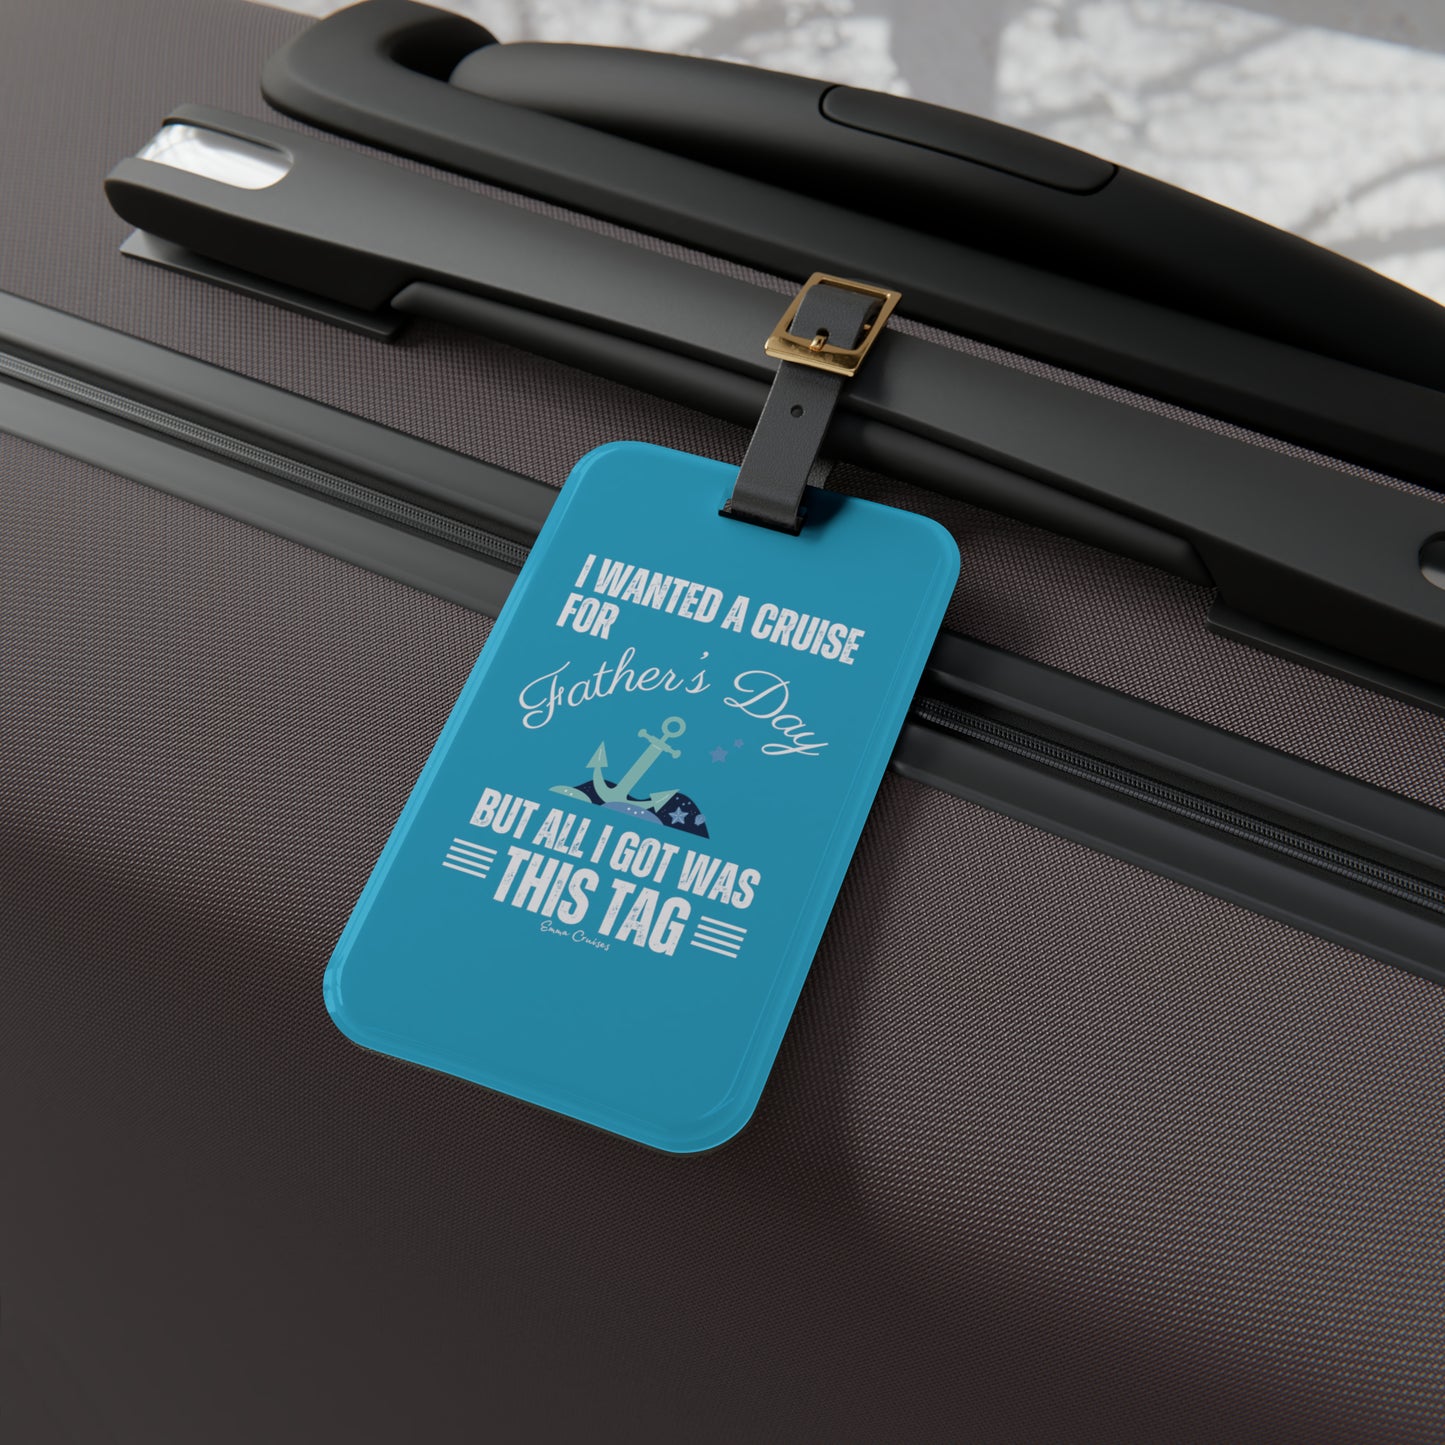 I Wanted a Cruise for Father's Day - Luggage Tag